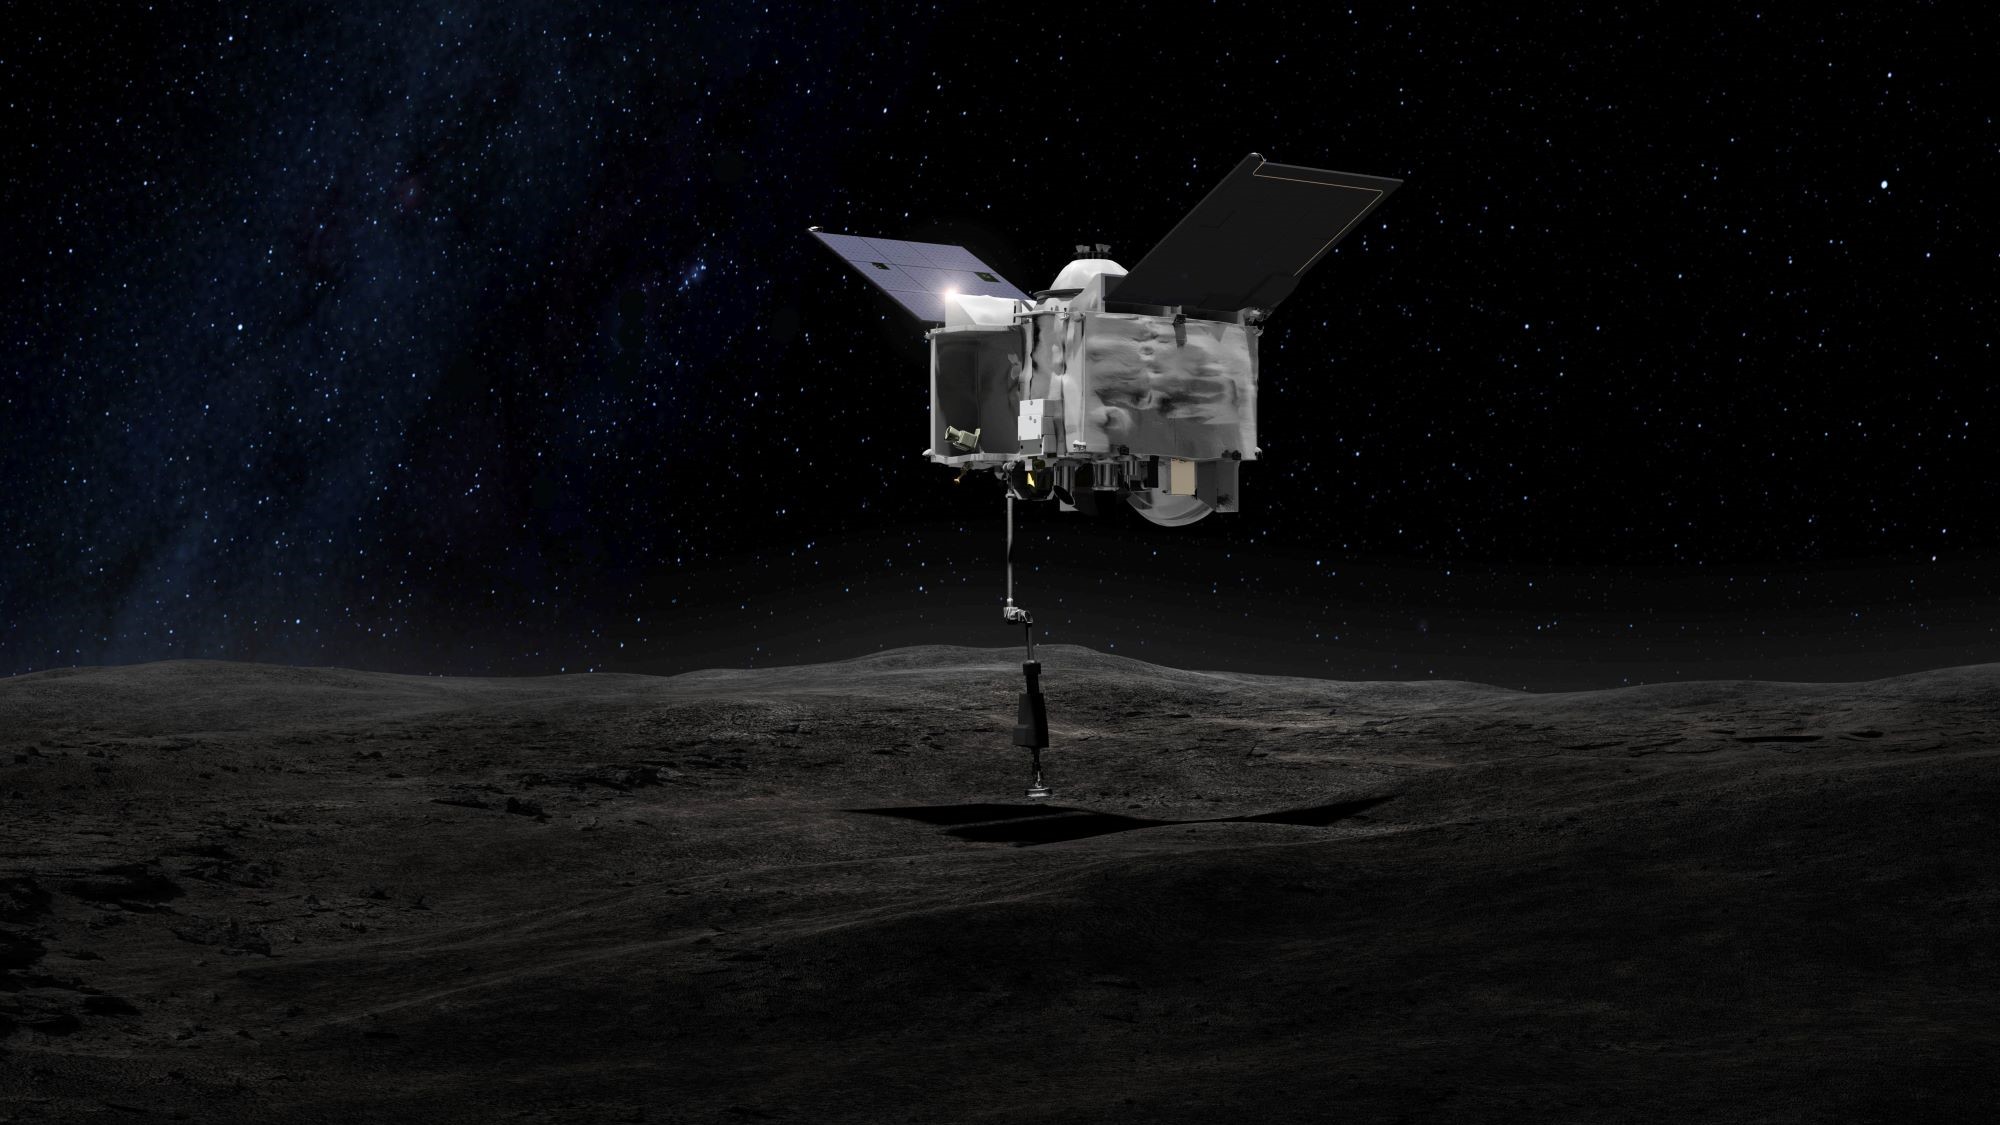 NASA’s OSIRIS mission delivered asteroid samples to Earth